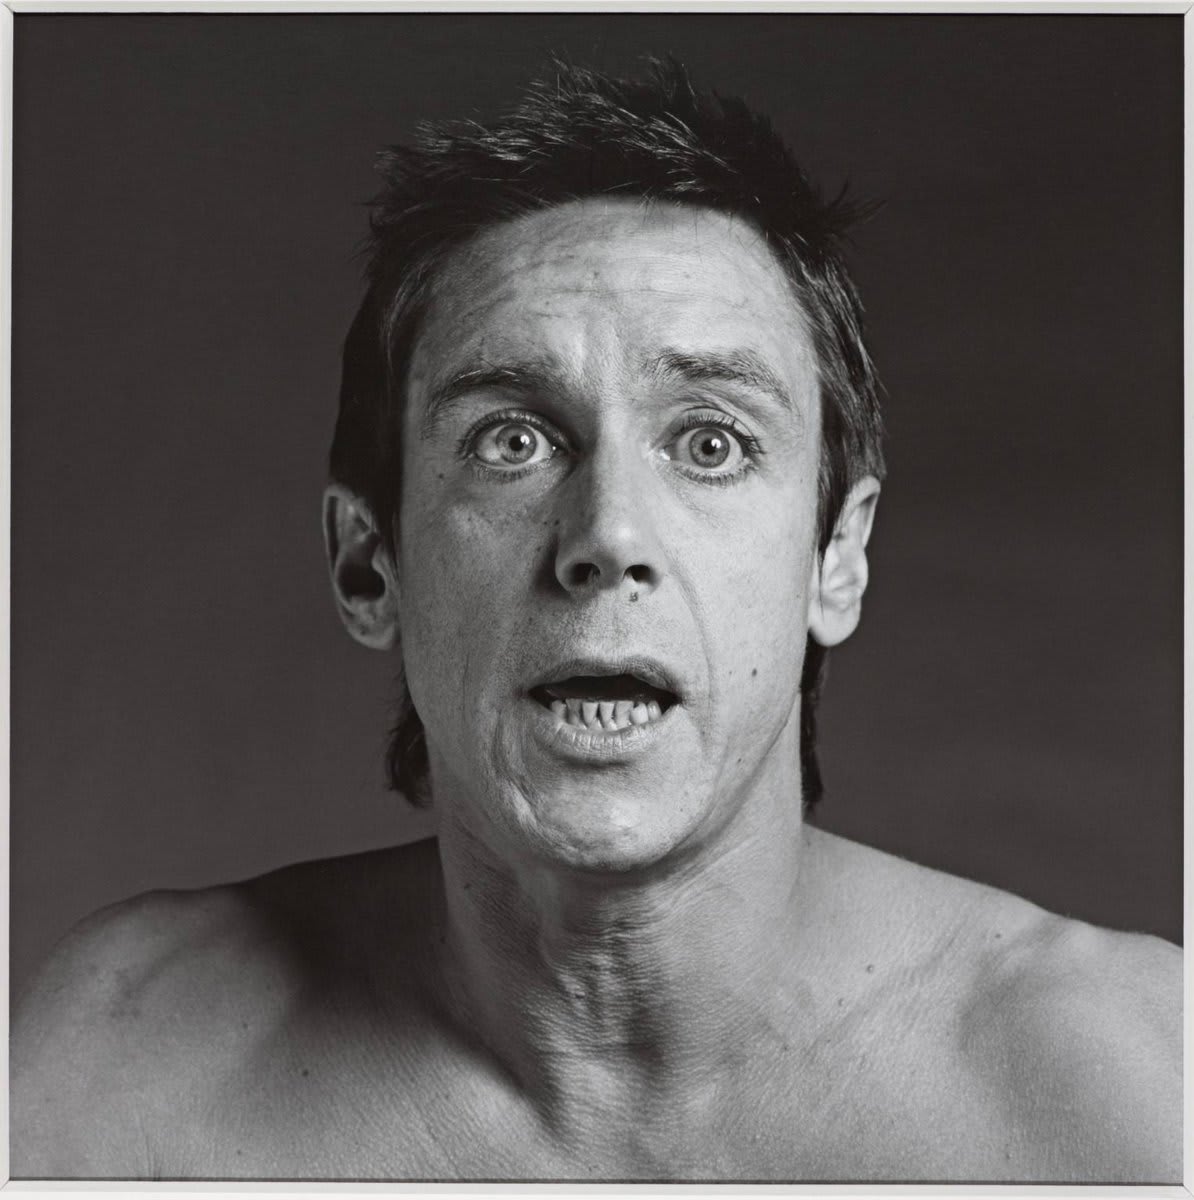 Happy birthday Iggy Pop! 🎈 This image was taken in 1981 by Robert Mapplethorpe, a photographer famed for his timeless portraits that ooze the character of the sitter.